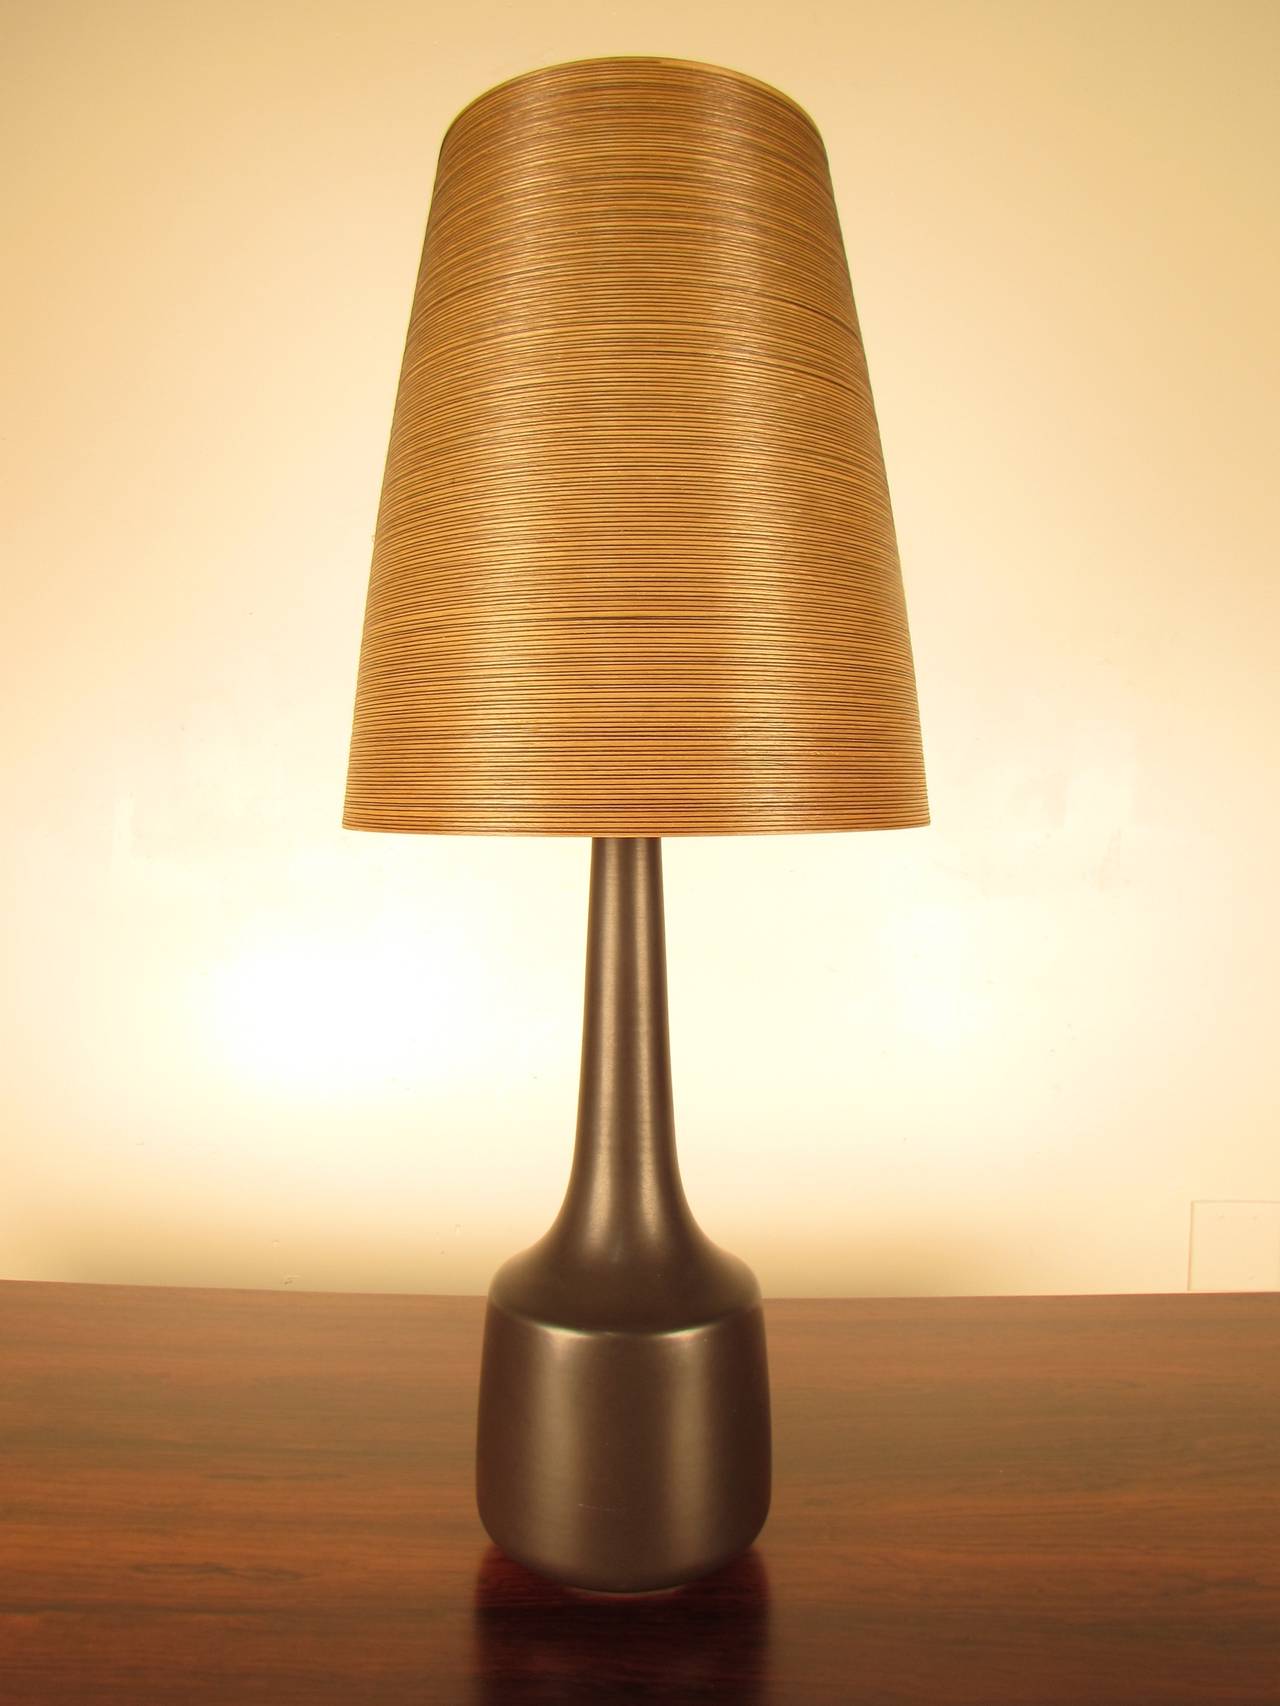 Tall, slender ceramic lamp by Lotte Bostlund (Canada). Timeless gunmetal glaze is wonderfully buttery and tactile; a striking juxtaposition to the ribbed resin shade, which is original to the piece. Lovely original finial has warm, rich